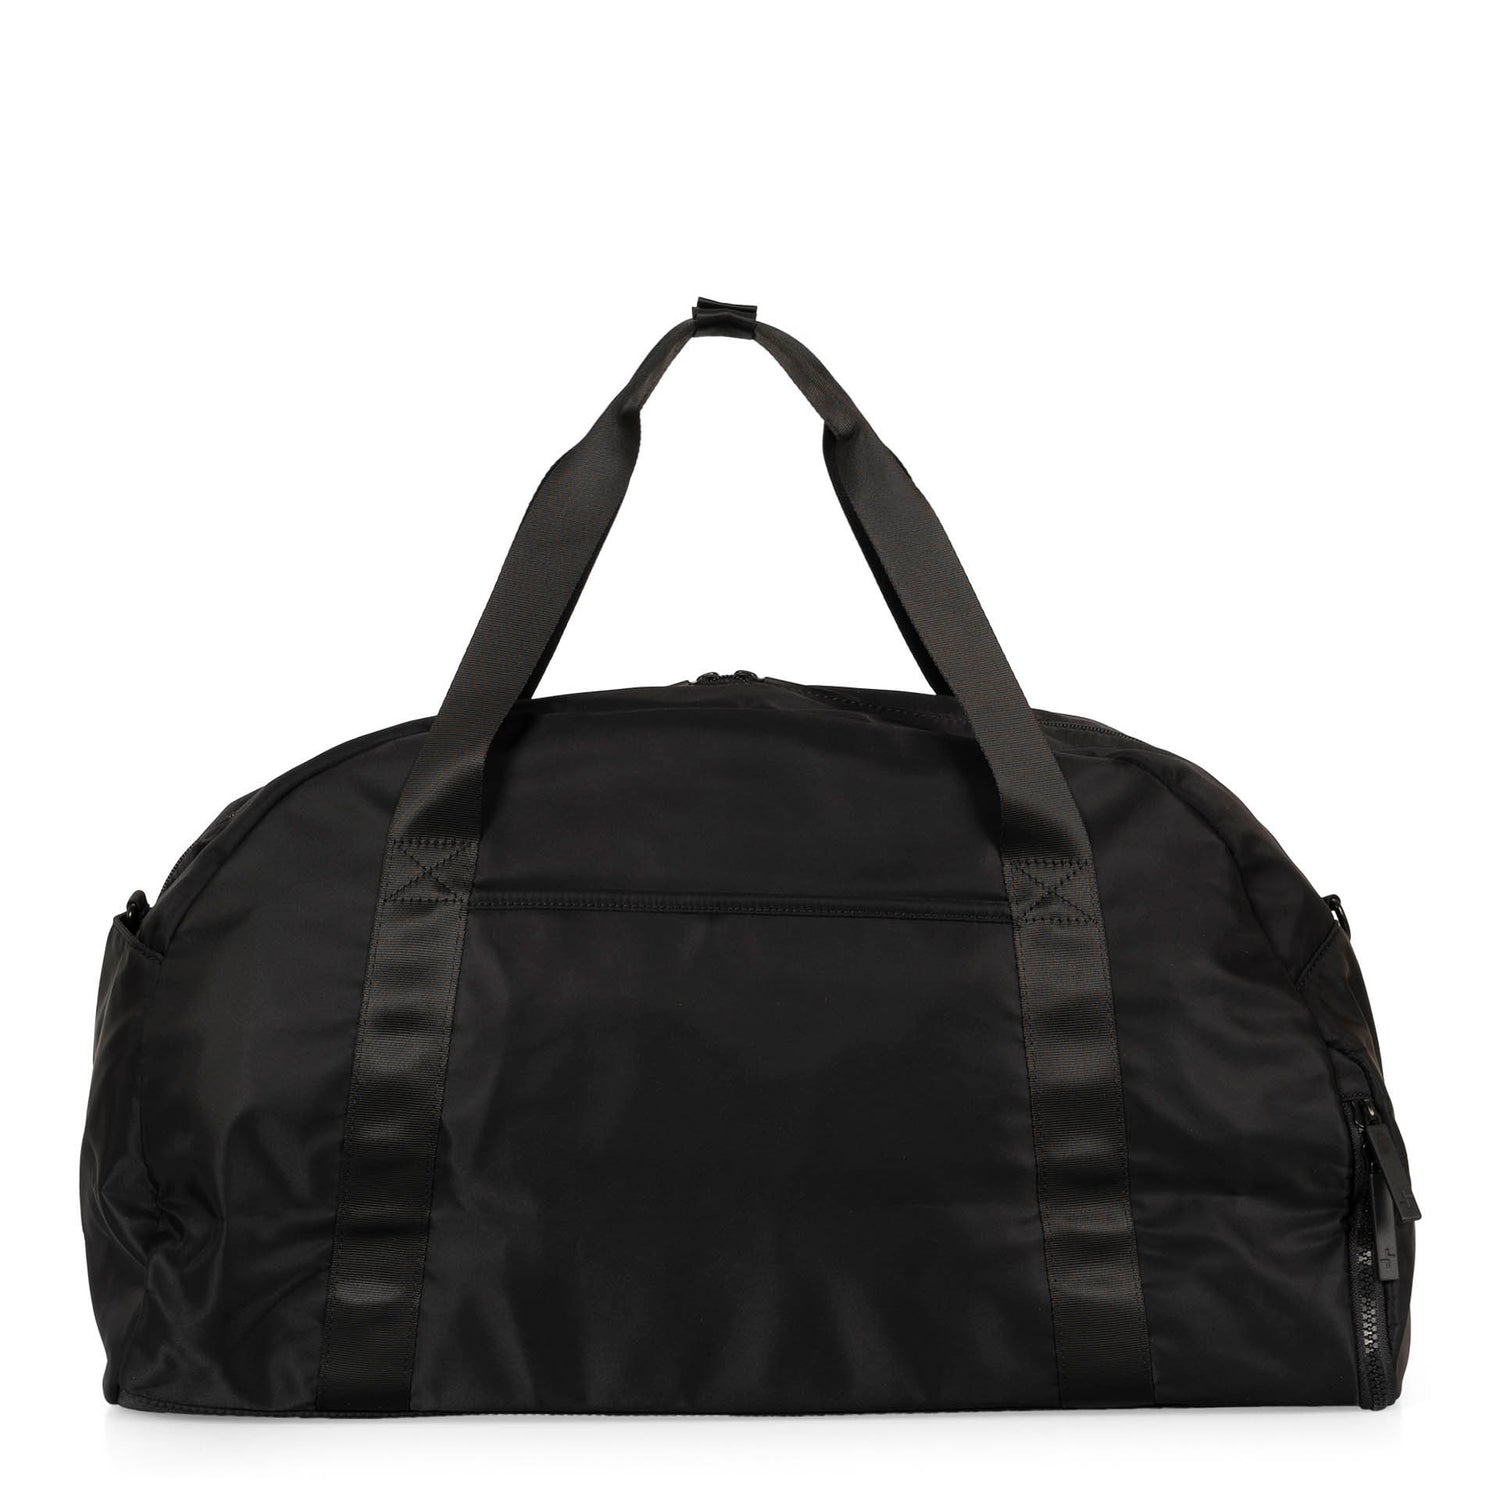 Back side of a black duffle bag called Sutton designed by Tracker on a white background, showcasing its top handle and the bottom of a shoe compartment.